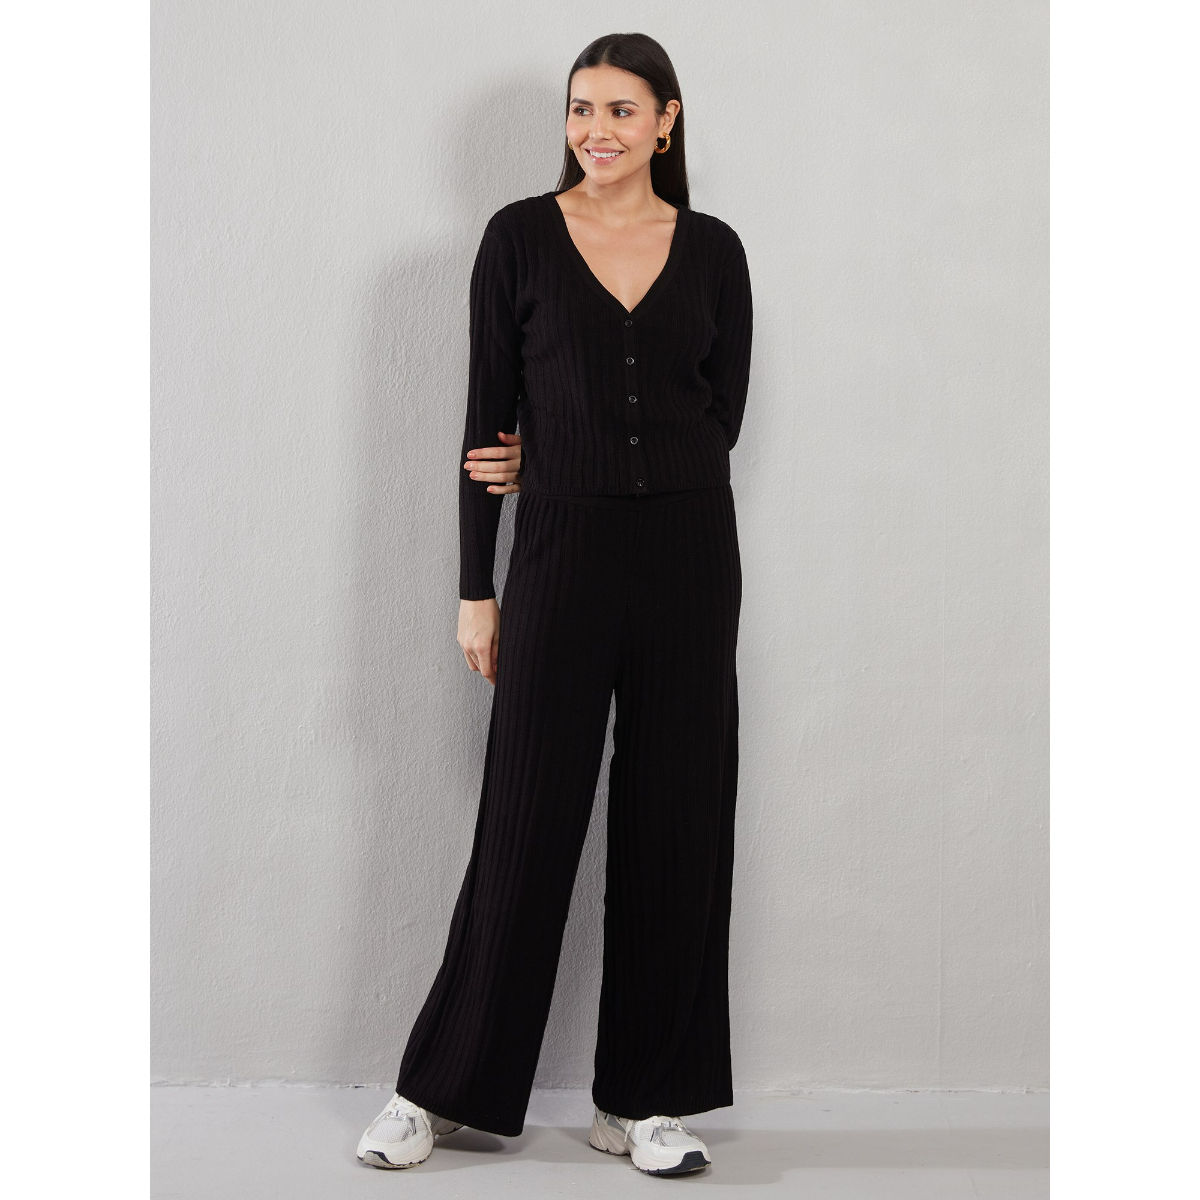 Buy Nykd by Nykaa Ribbed Flare Pants NYLE113 Jet Black online